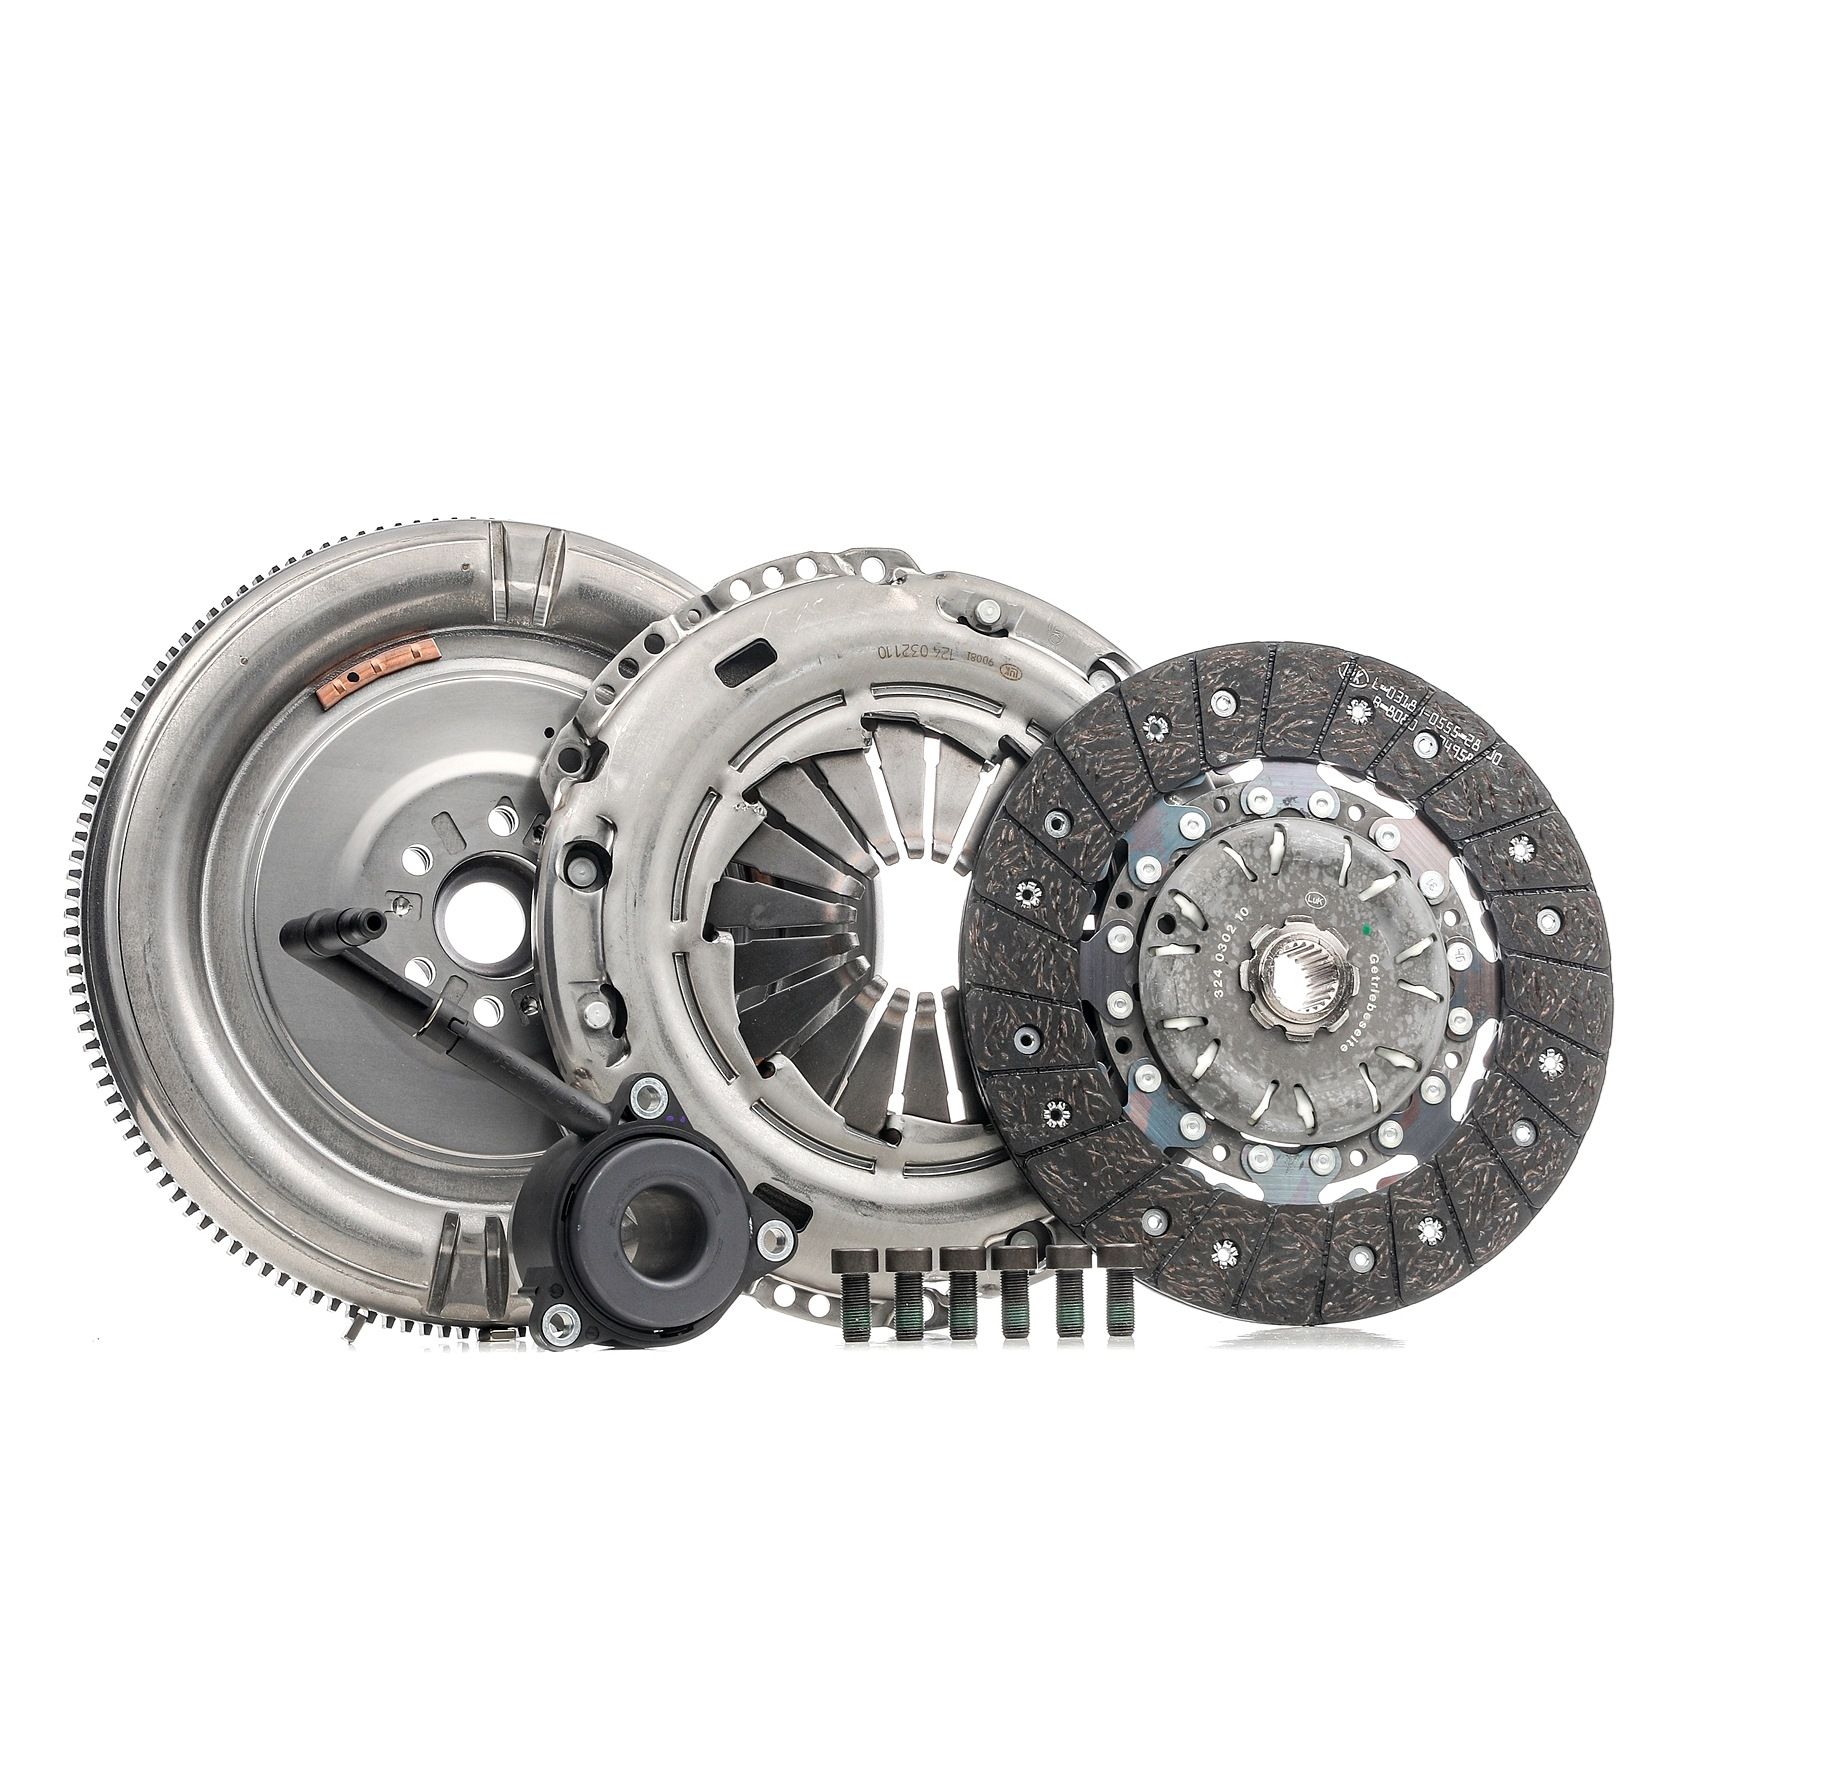 Complete clutch kit LuK BR 0241 with central slave cylinder, without pilot bearing, with flywheel, with screw set, Dual-mass flywheel with friction control plate - 600 0179 00